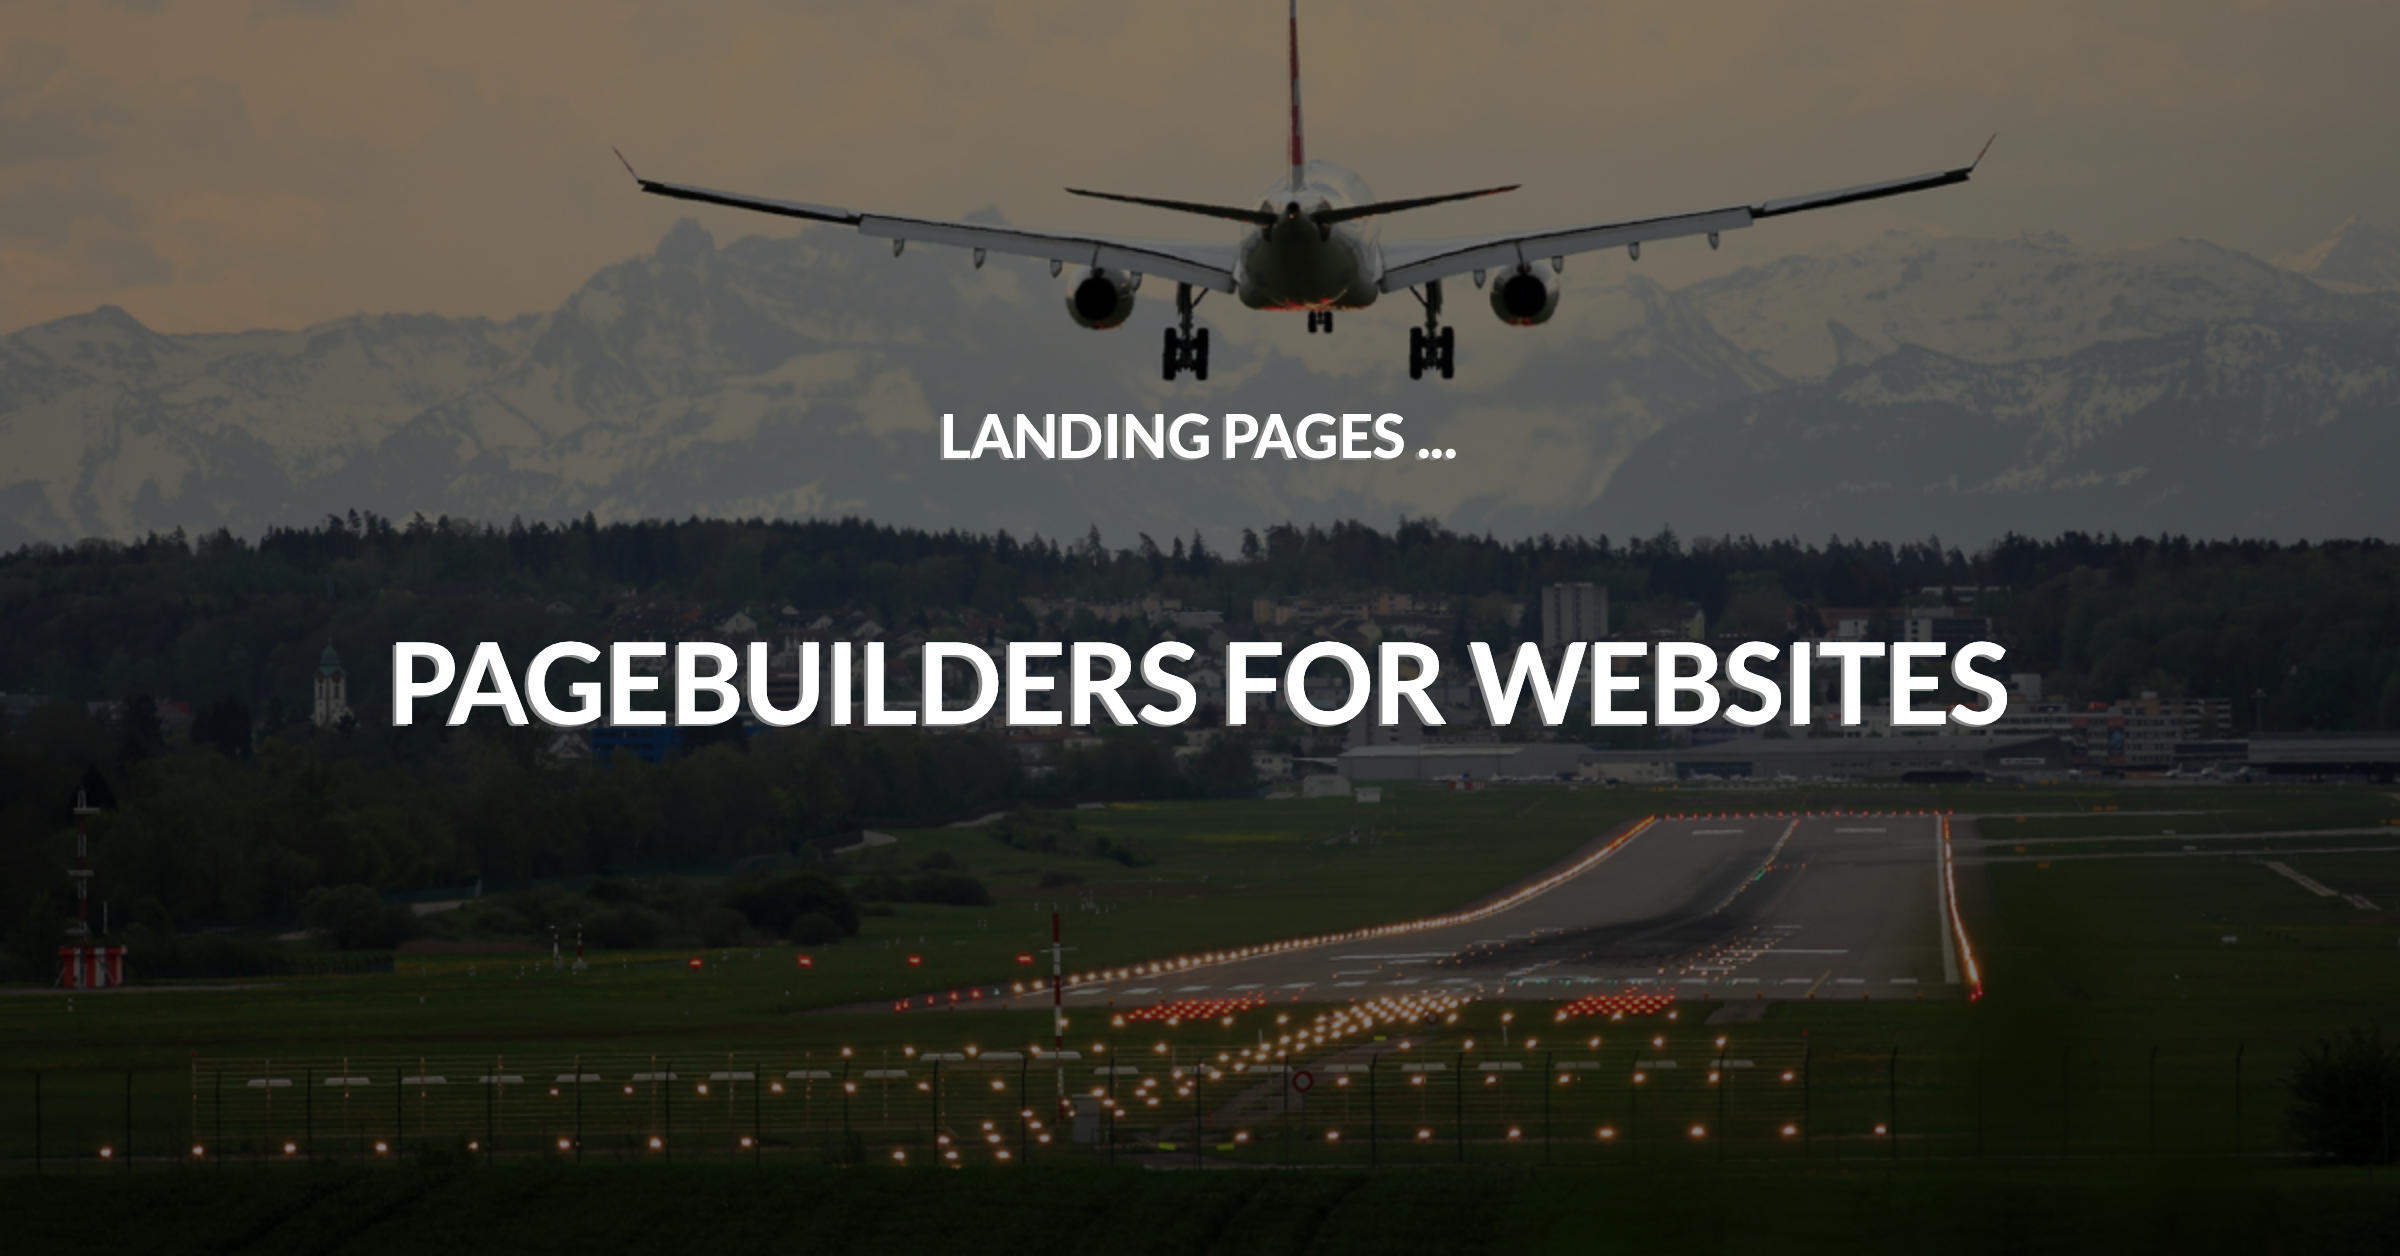 Image showing an aircraft landing, representing landing pages for websites